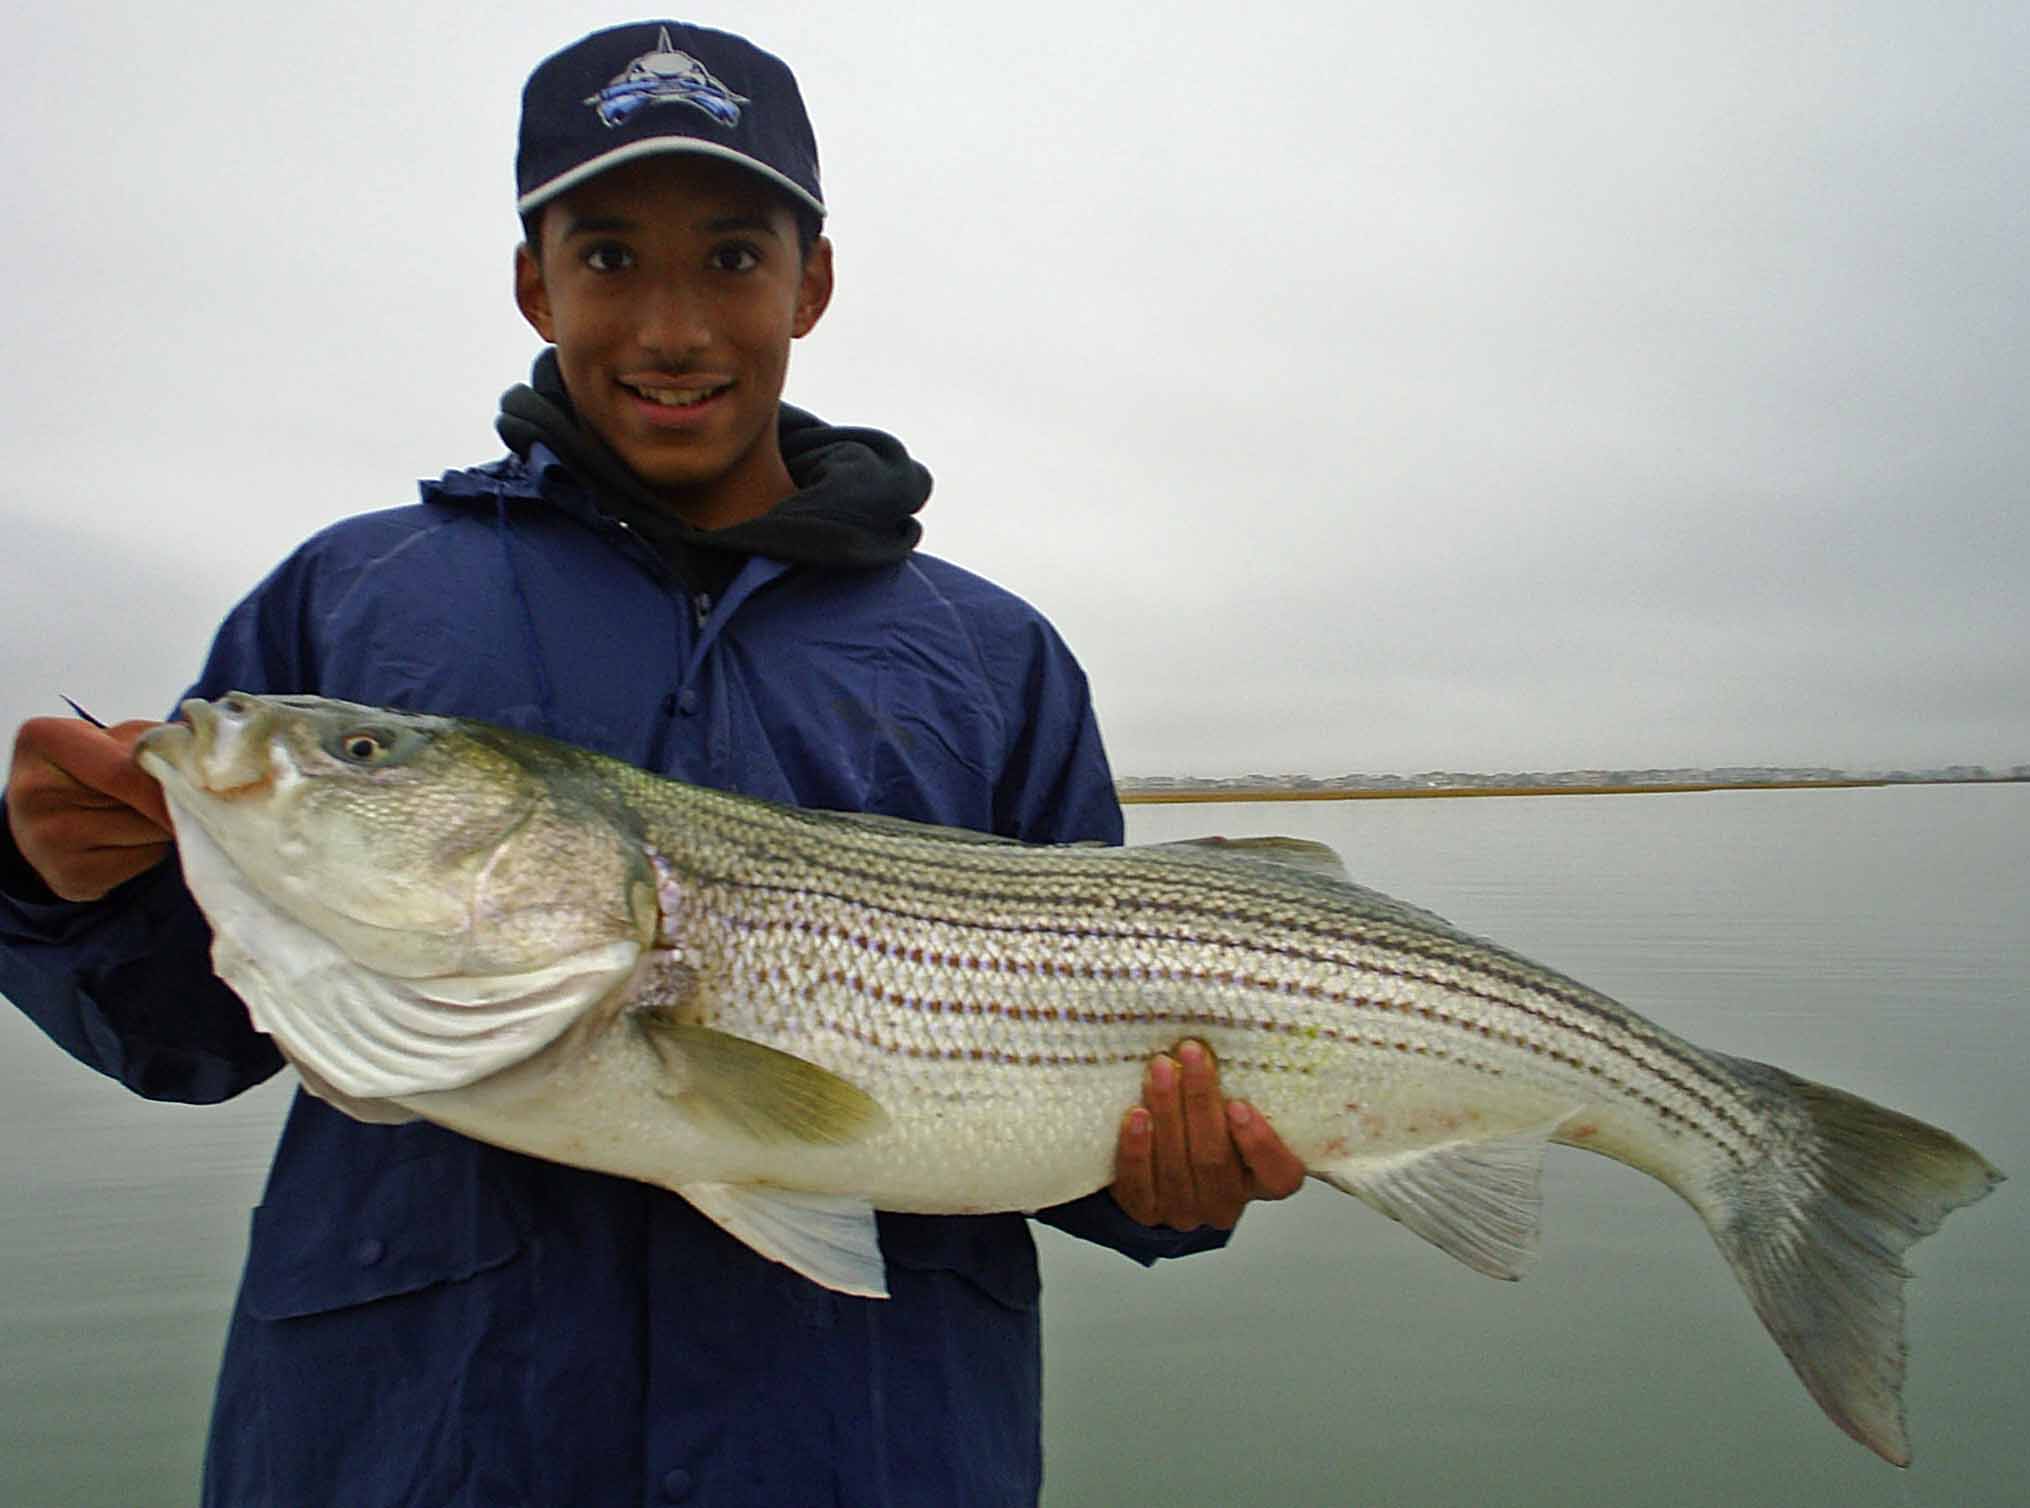 Time Out Charters offers fishing in Southern New Jersey for flounder, striper, weakfish, bluefish, sharks, tautog and more!